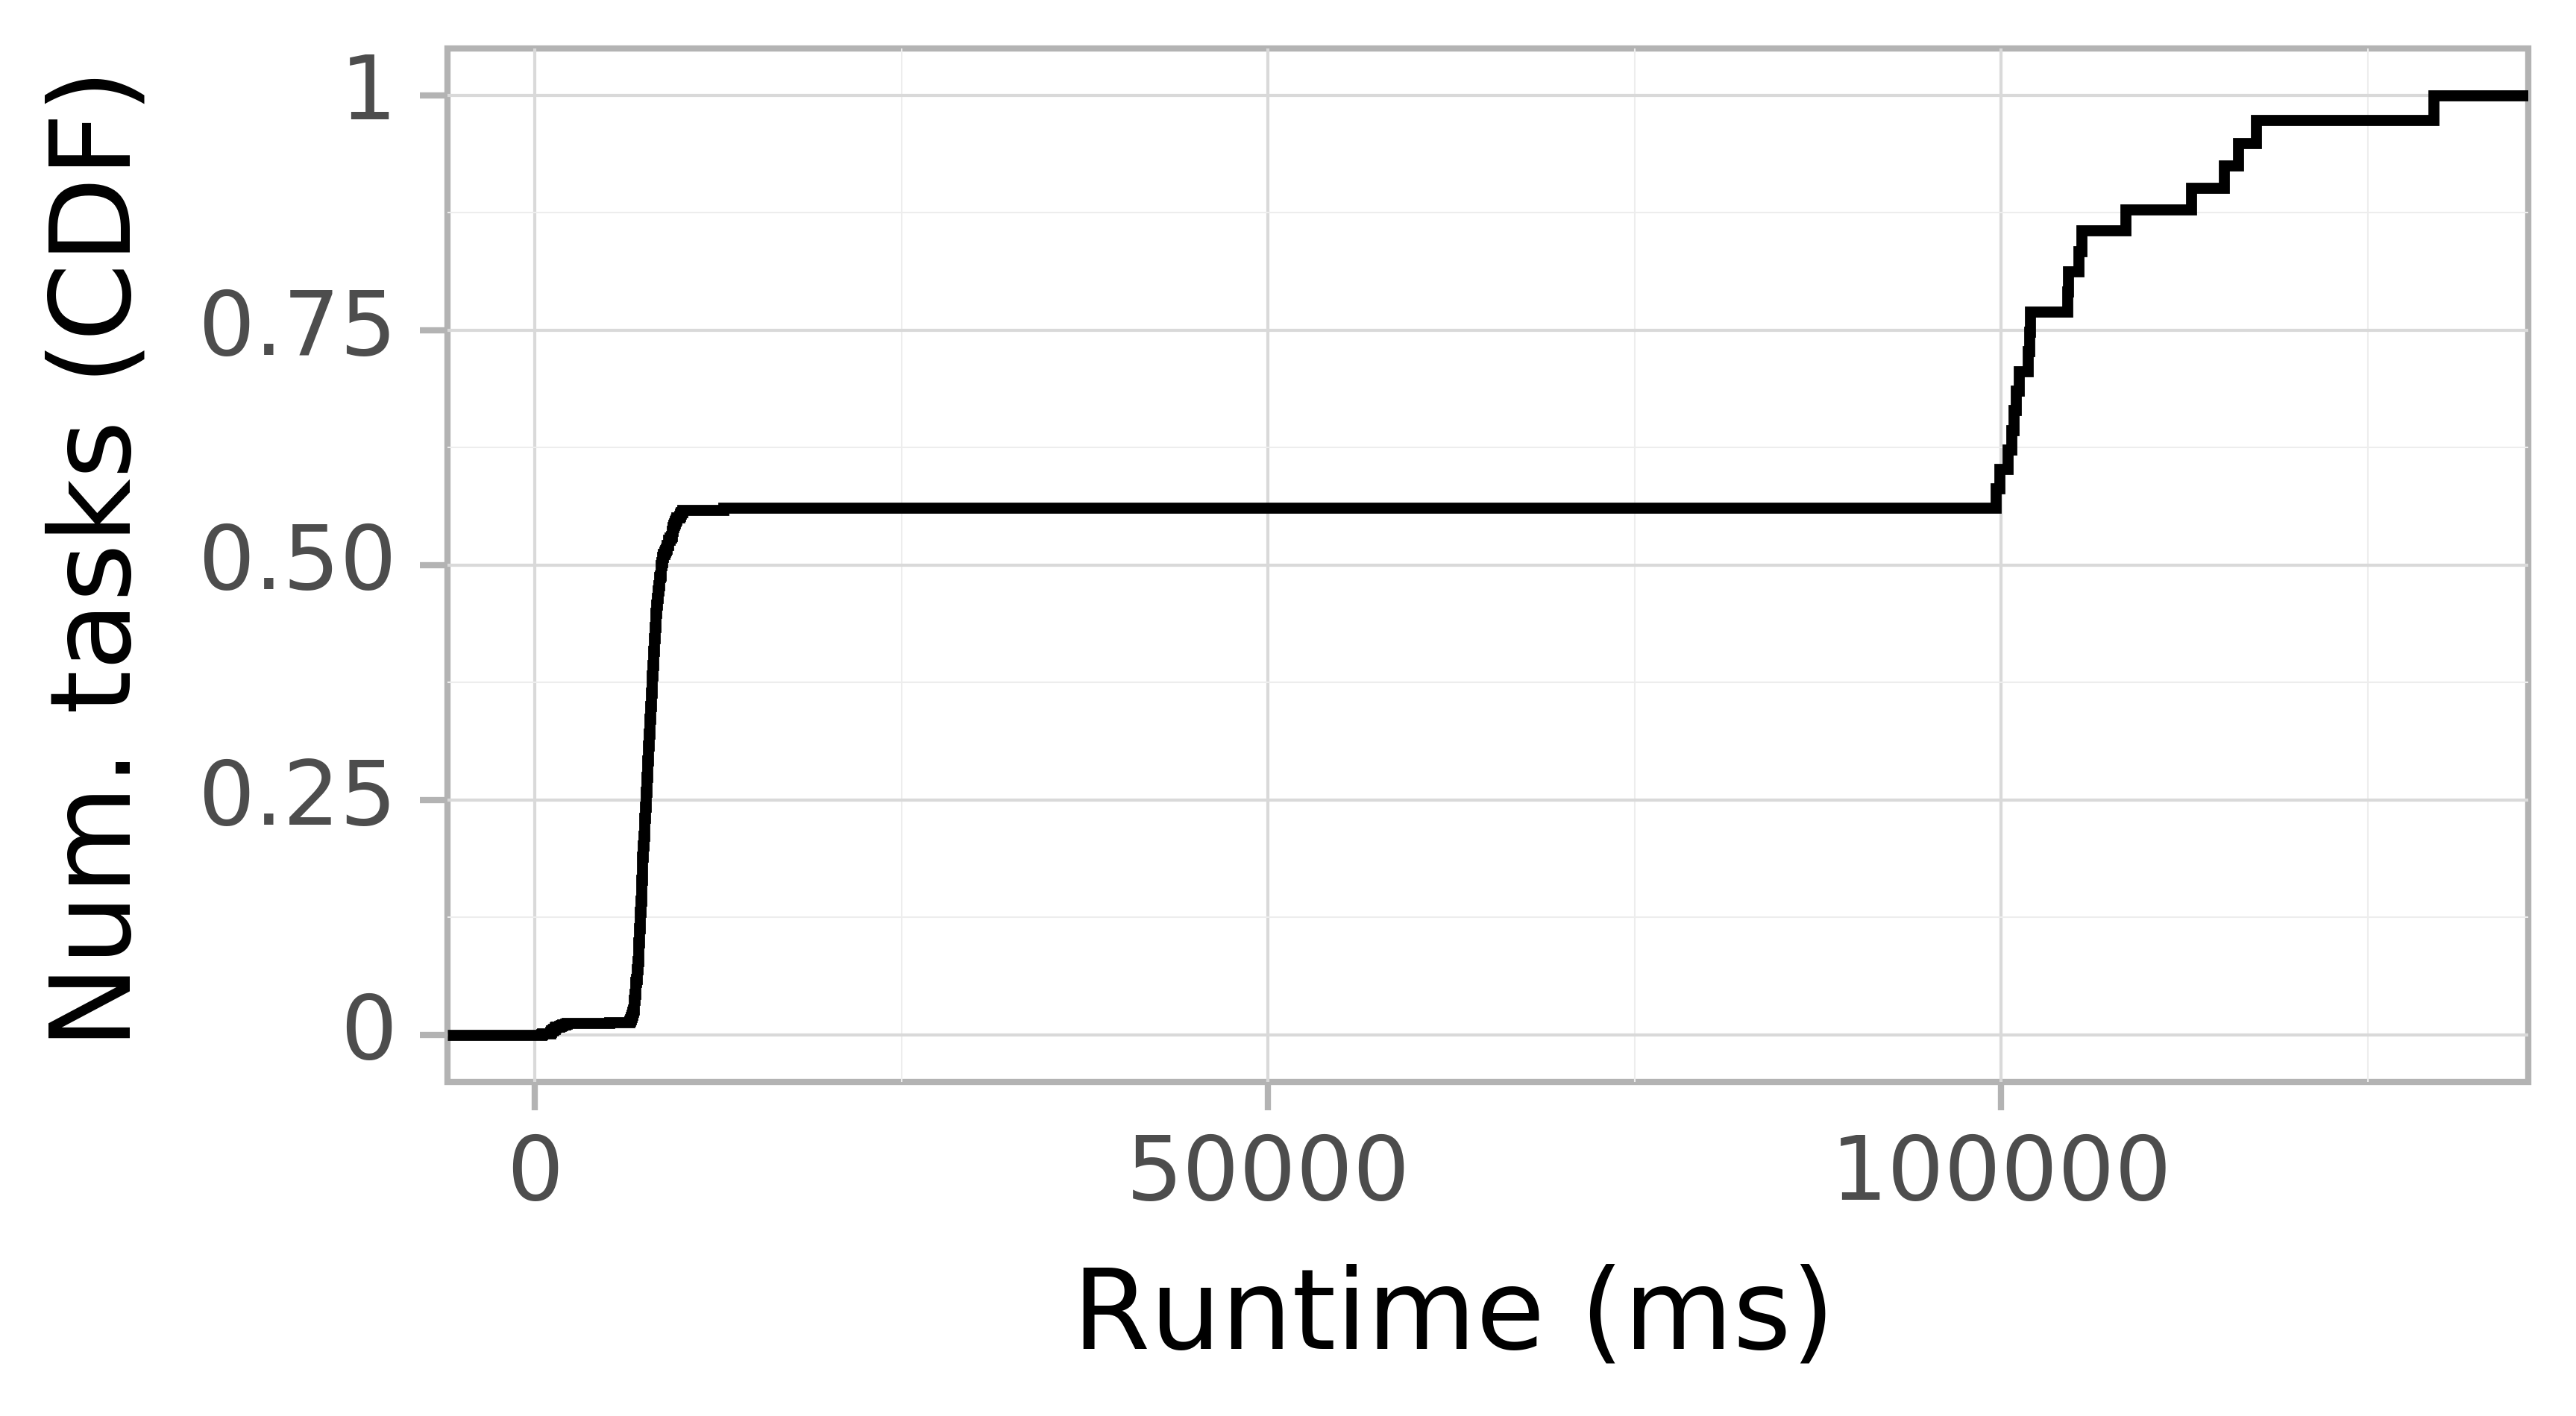 Task runtime CDF graph for the askalon-new_ee30 trace.